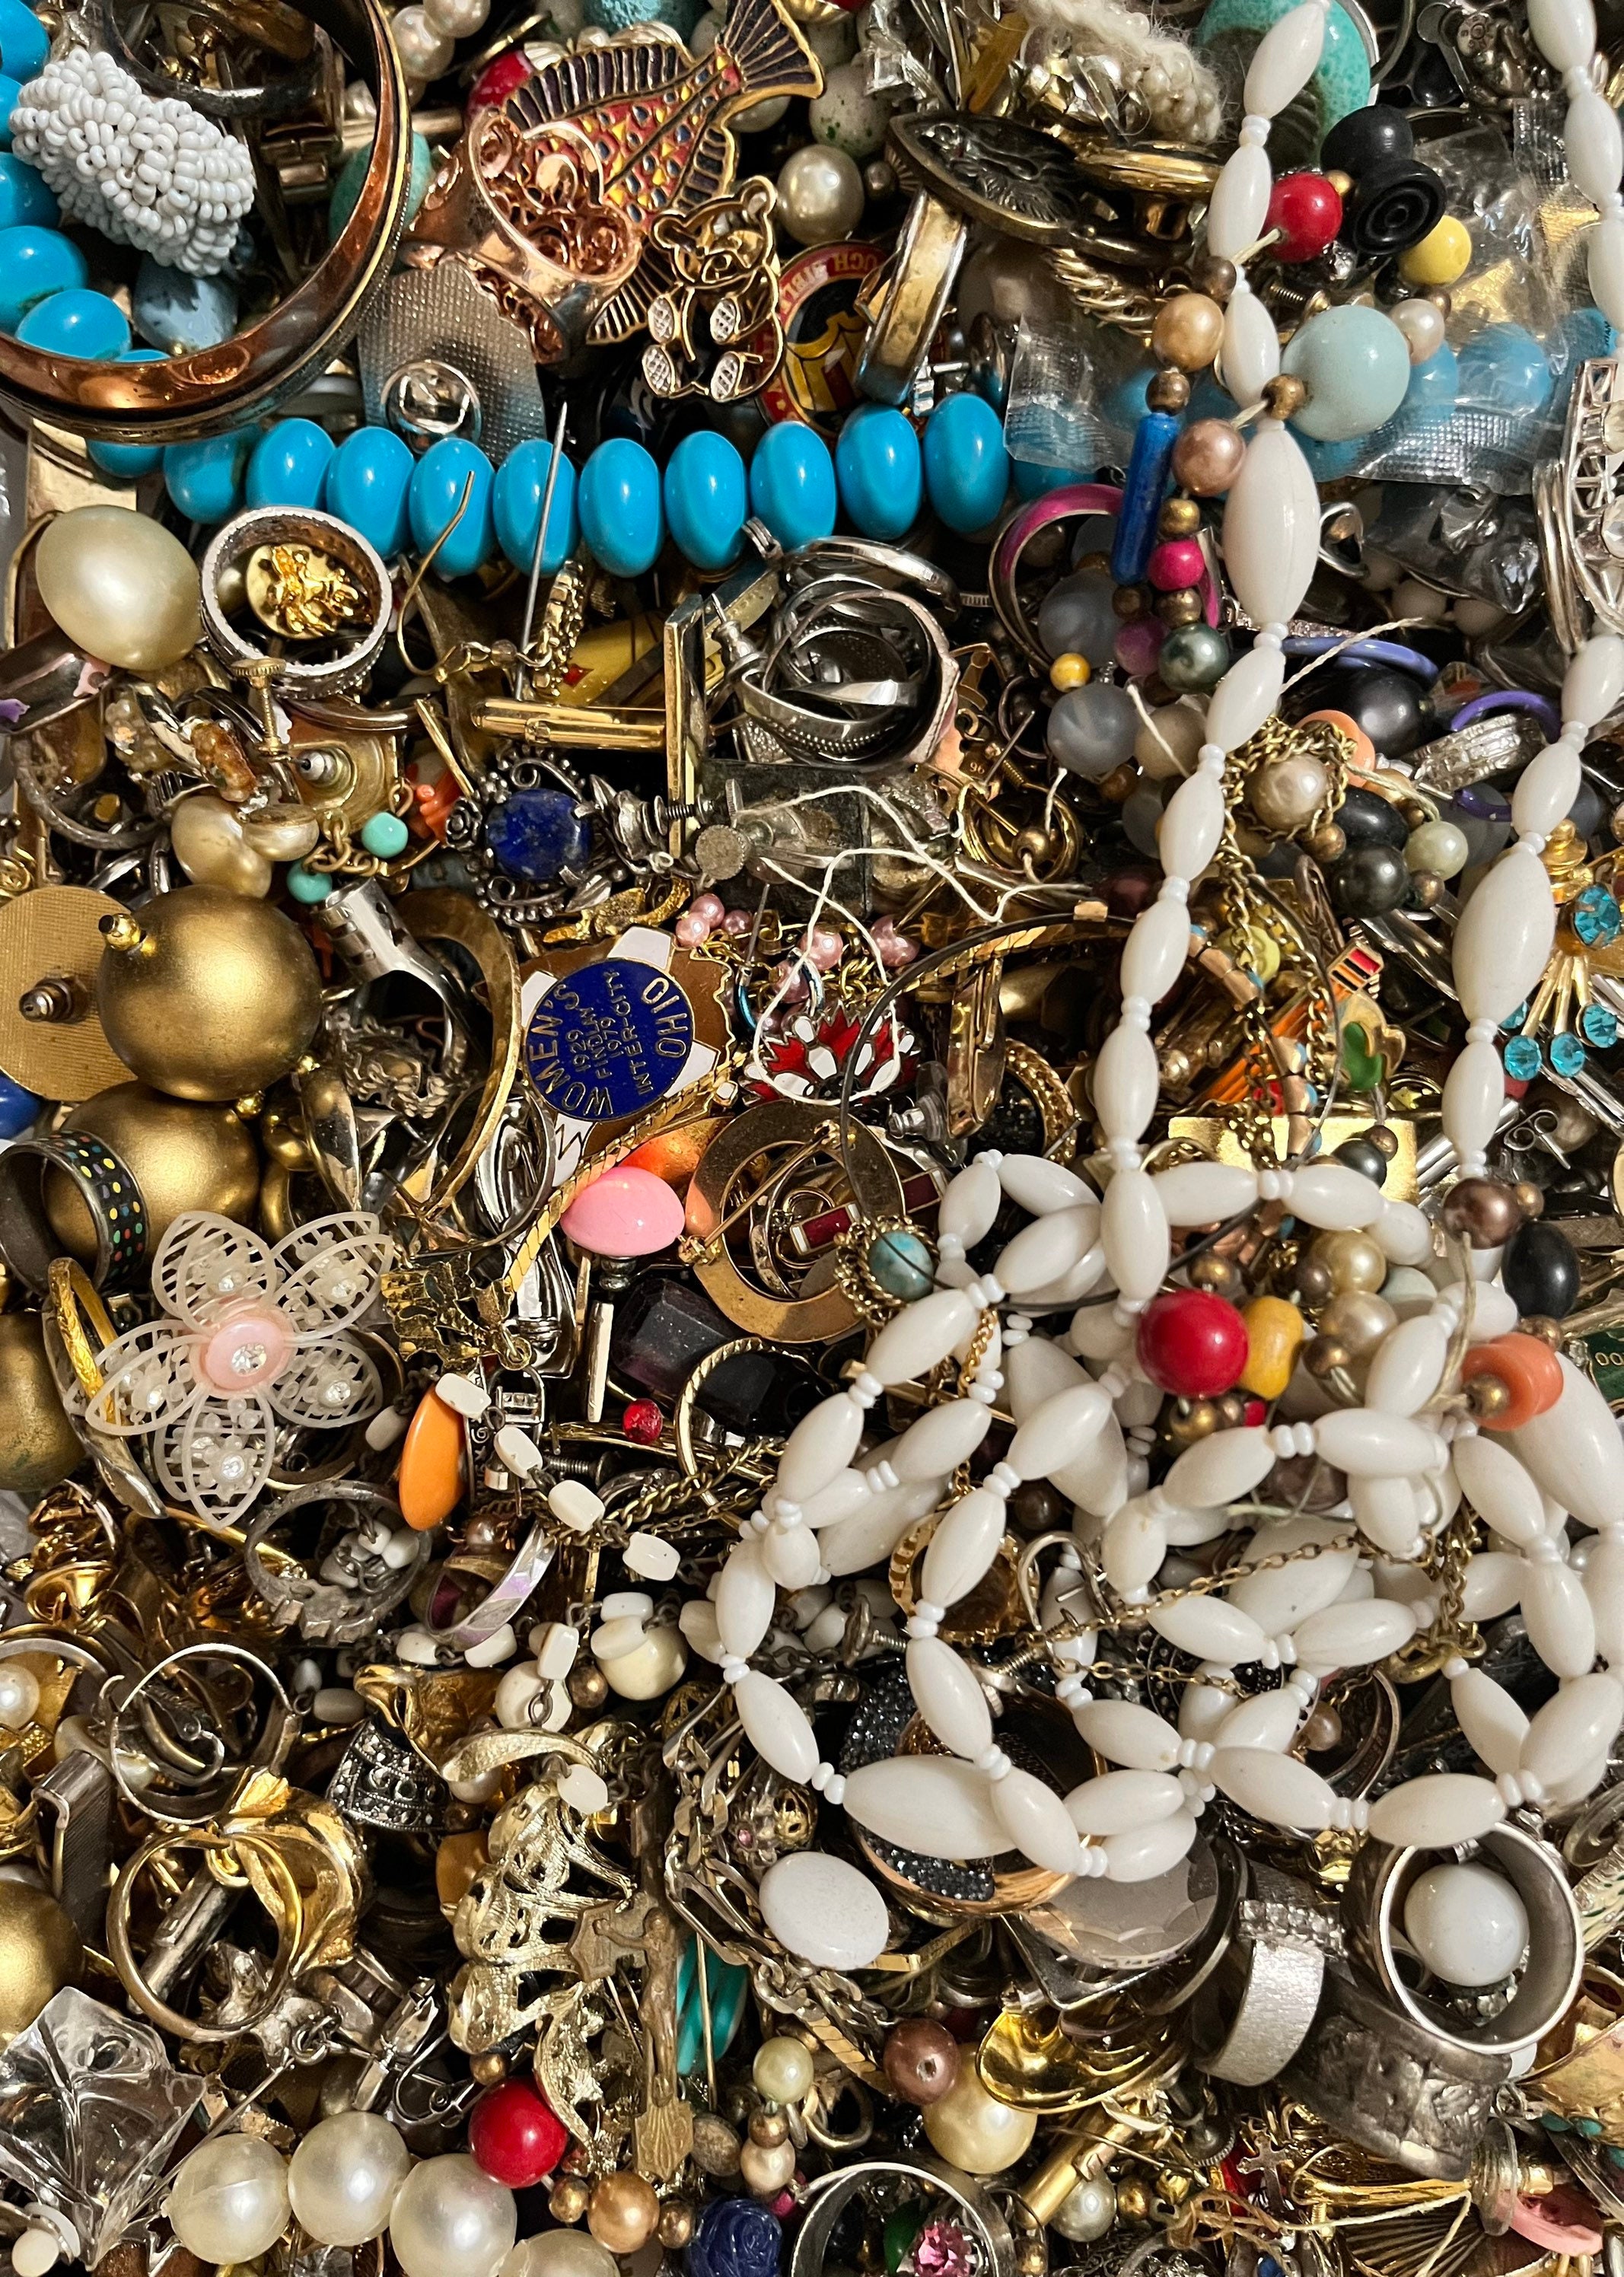 Bulk Fashion Jewelry Vintage to Now Broken Salvage Assorted Non Wearable Lot